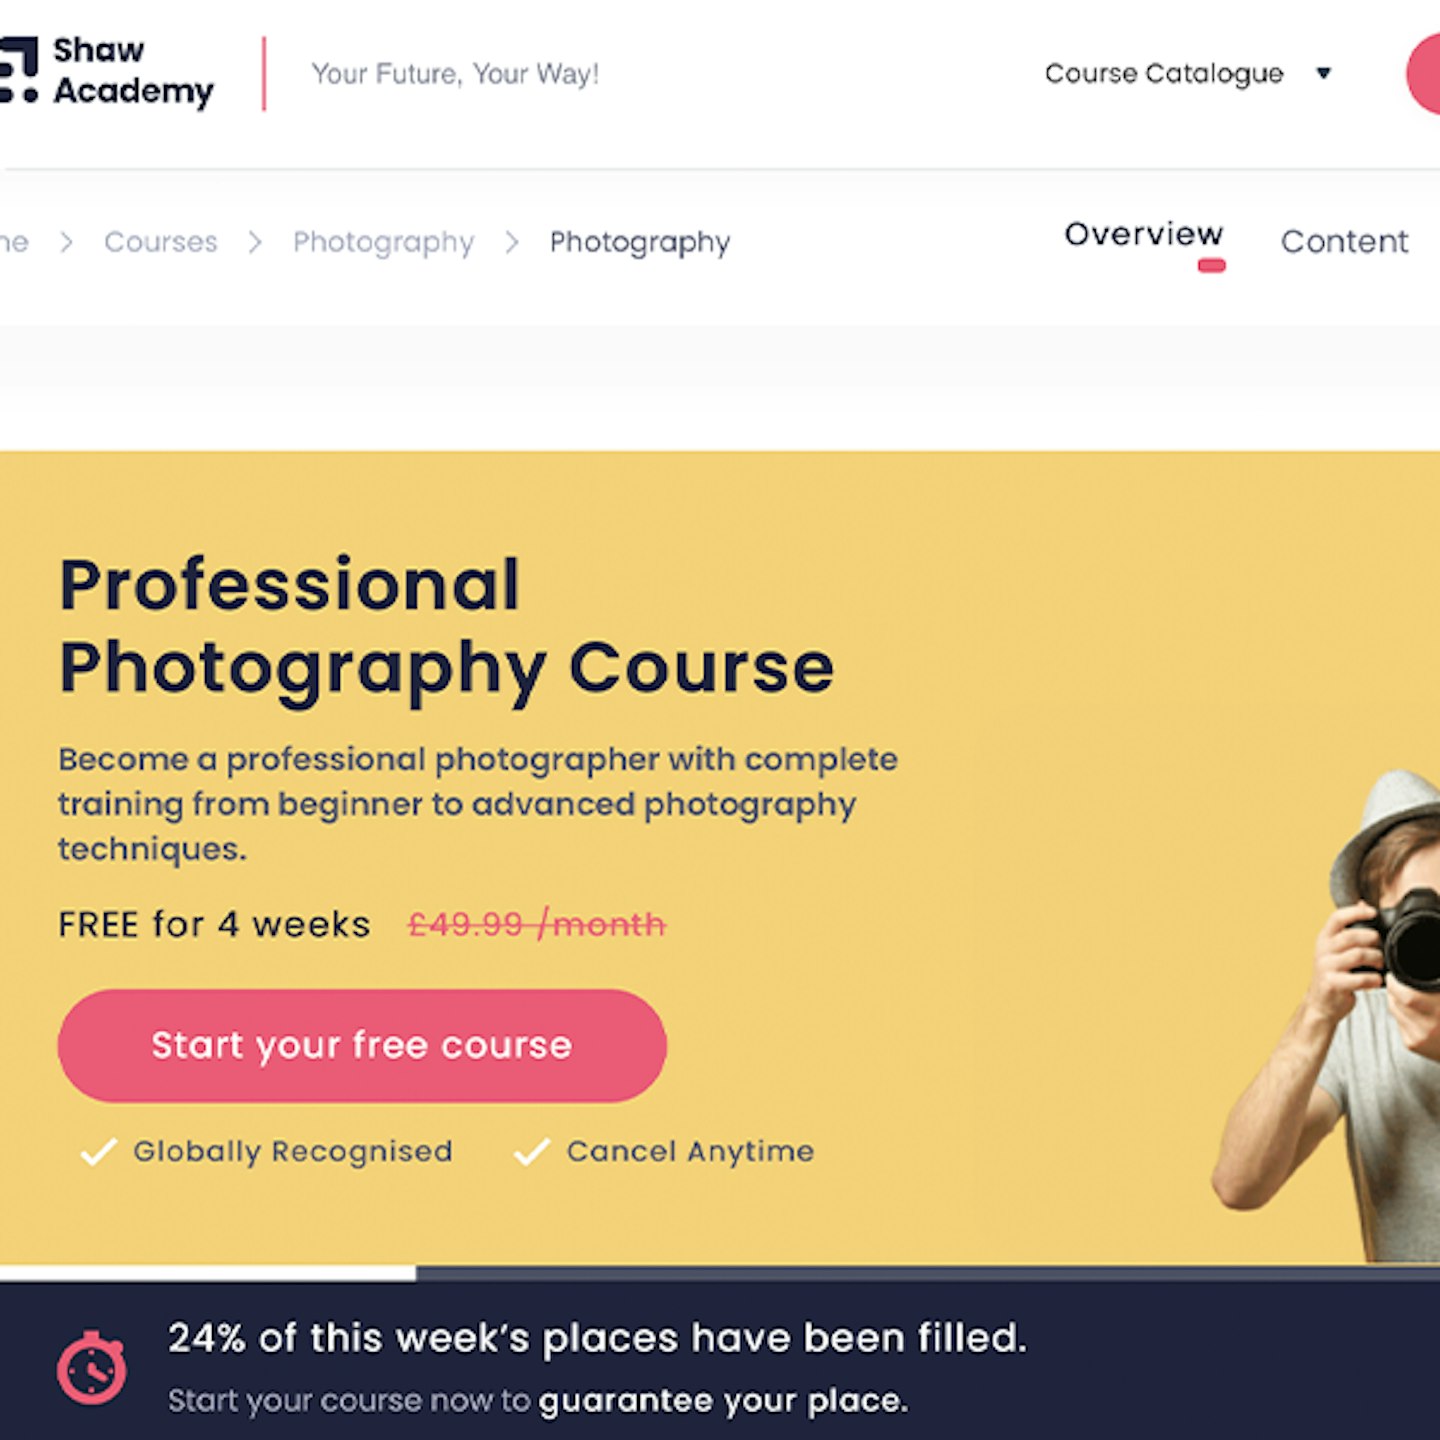 Shaw Academy - Professional Photography Course